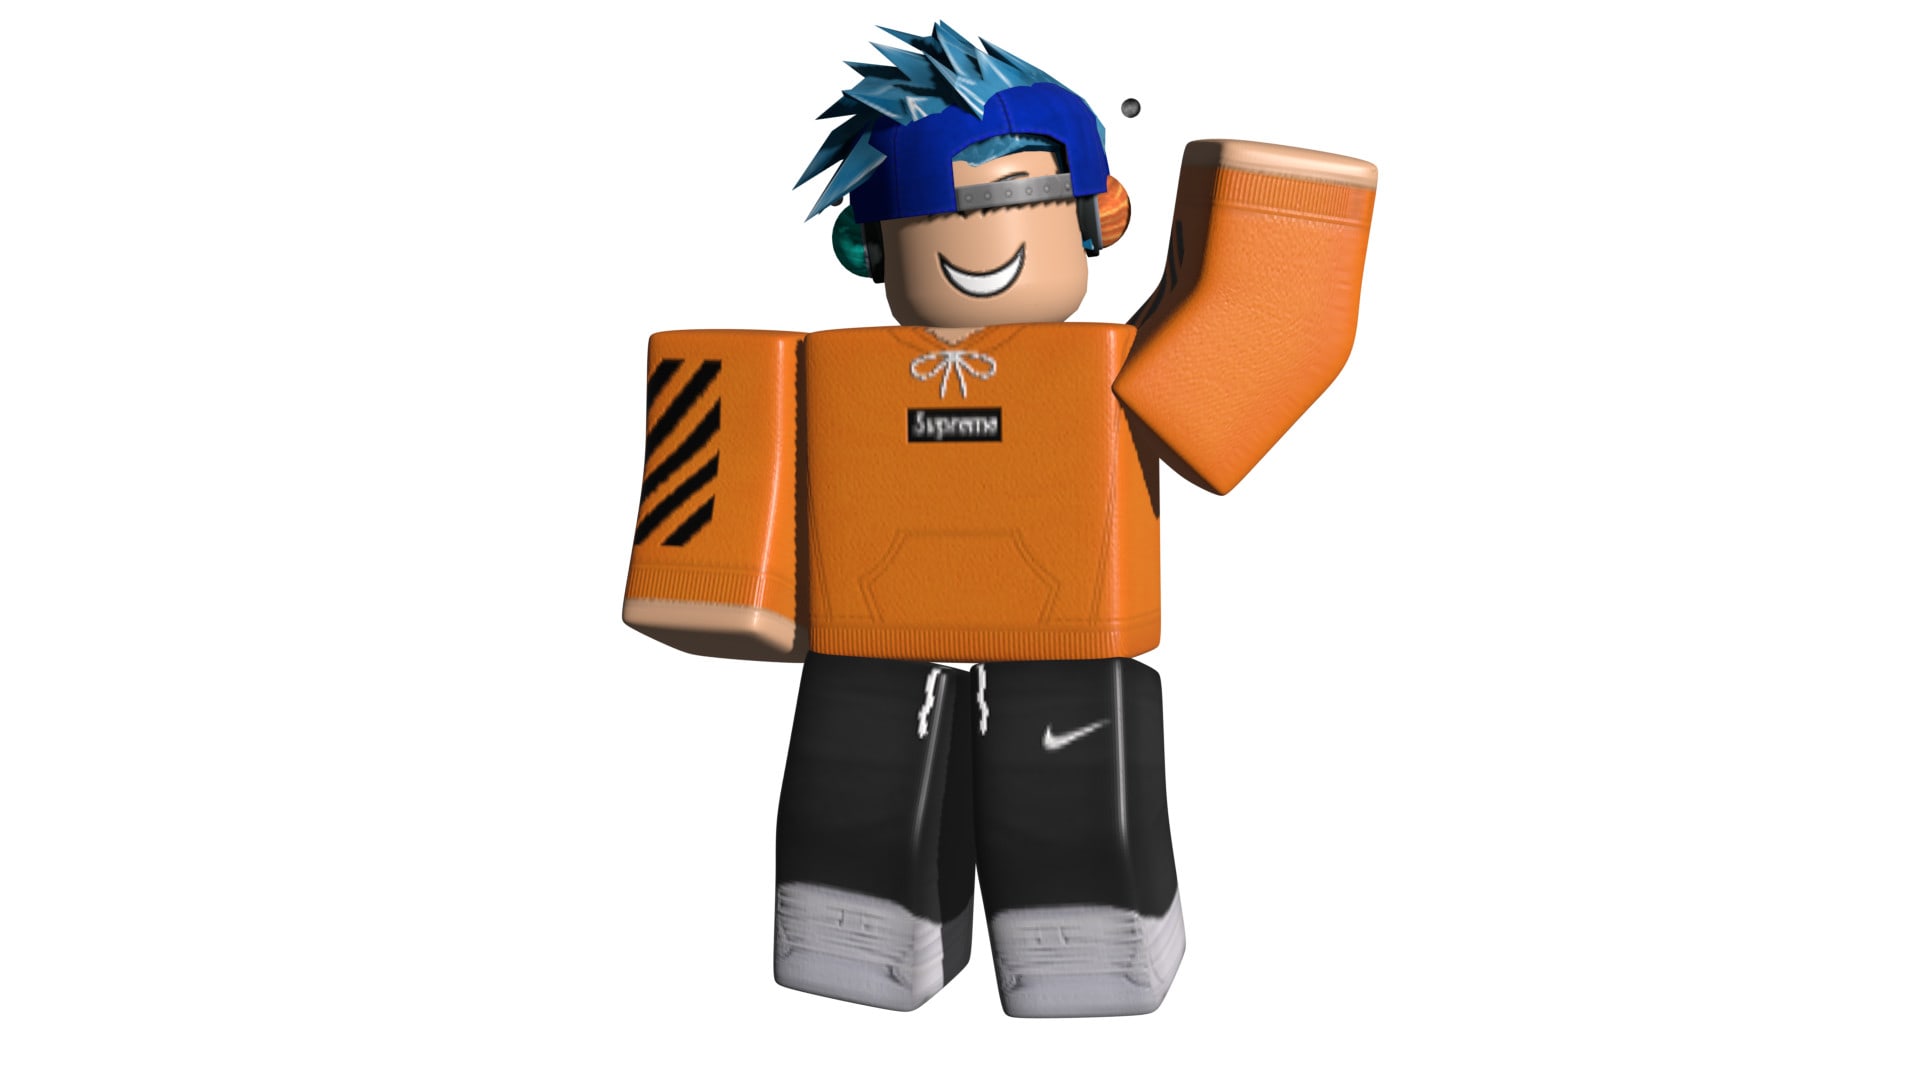 Make a transparent roblox gfx for you by Caisy_rblx